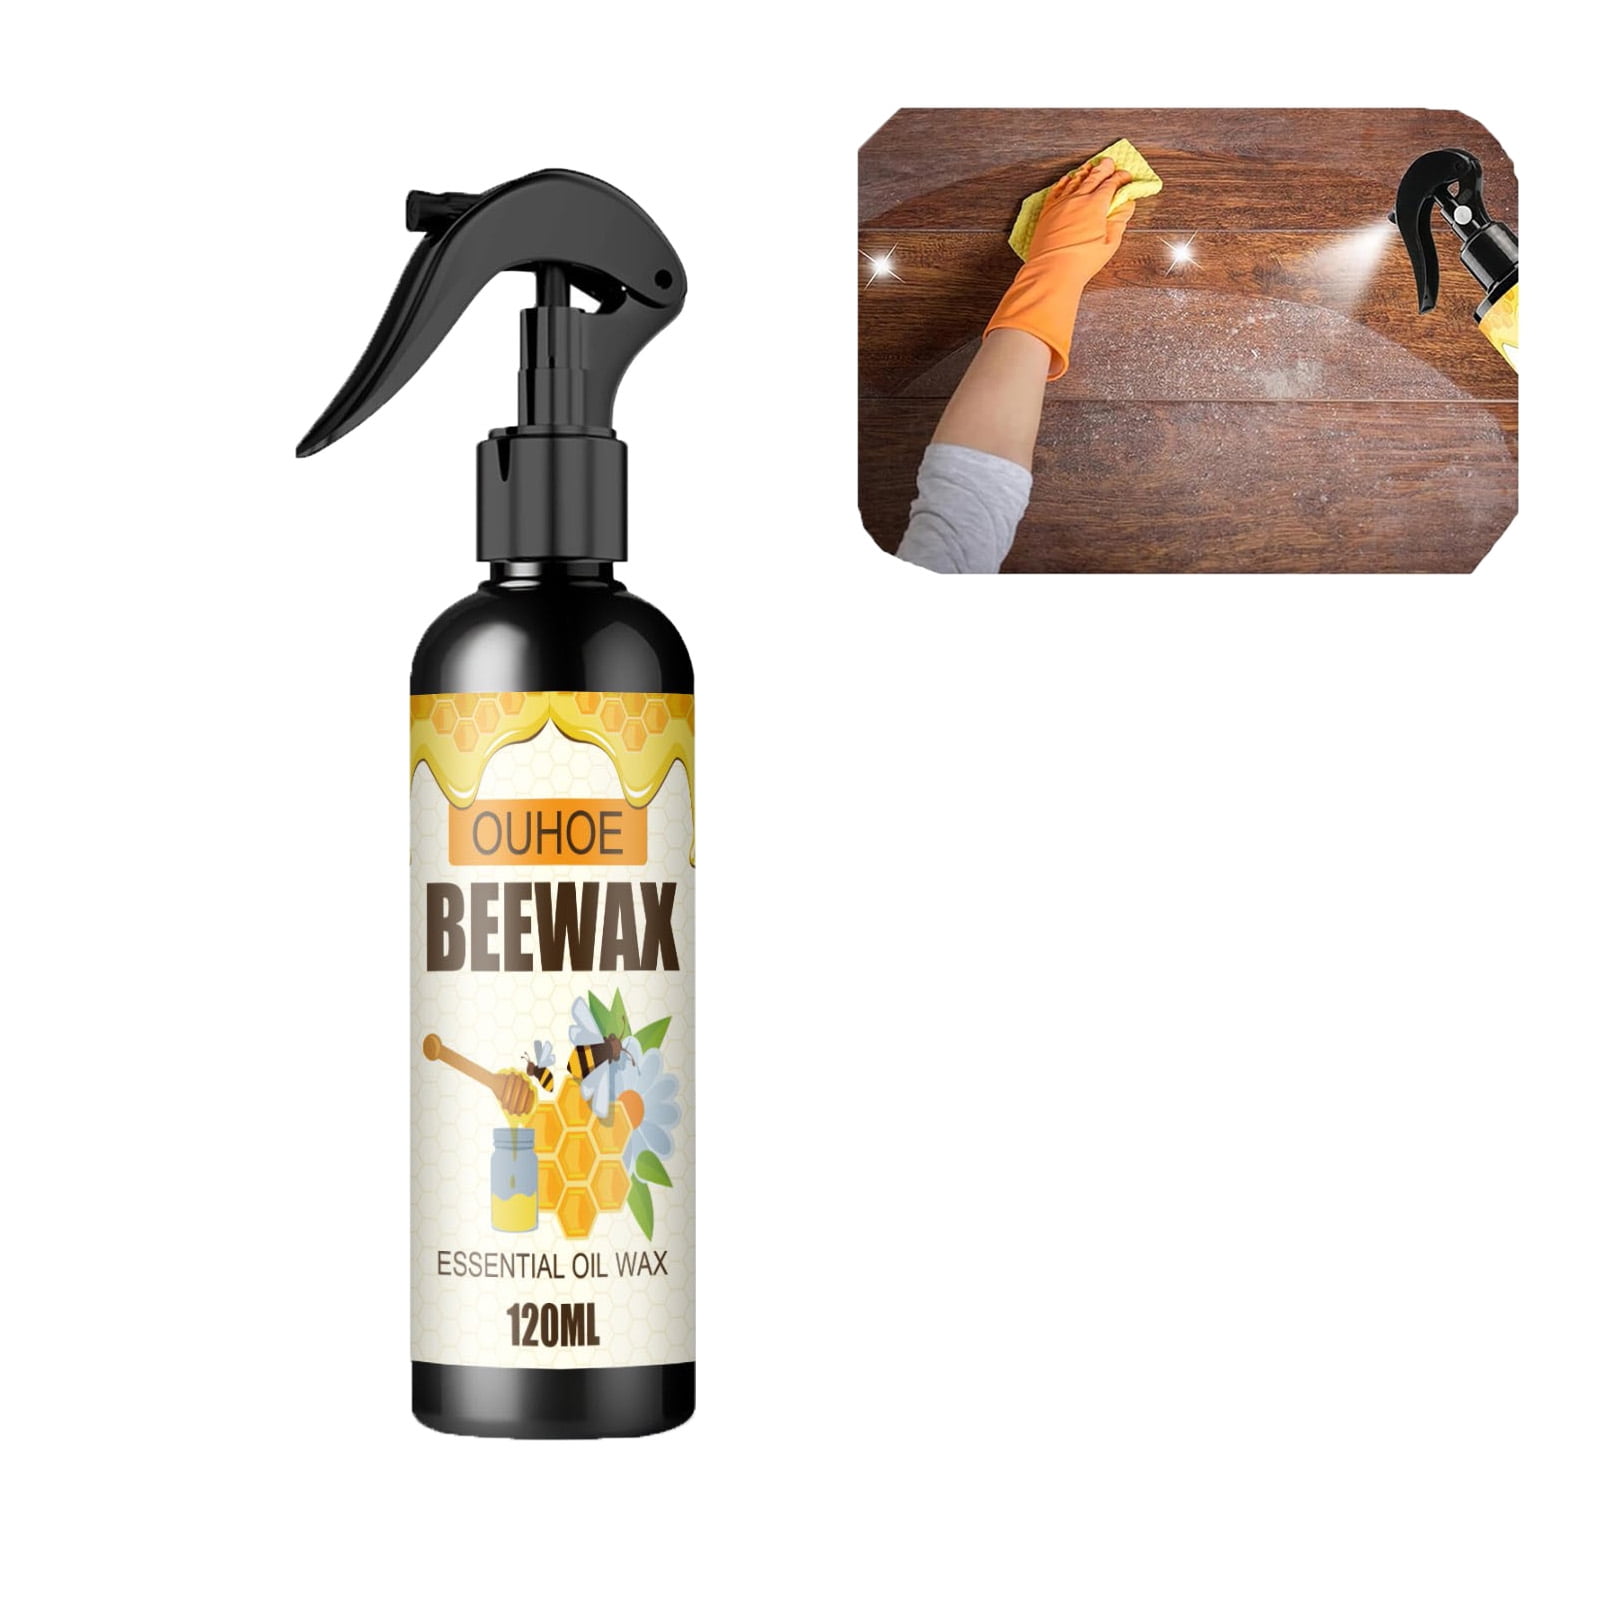 Natural Micro-molecularized Beeswax Spray, Beeswax Spray Furniture Polish  And Cleaner, Crack And Scratch Renovation Care Wax